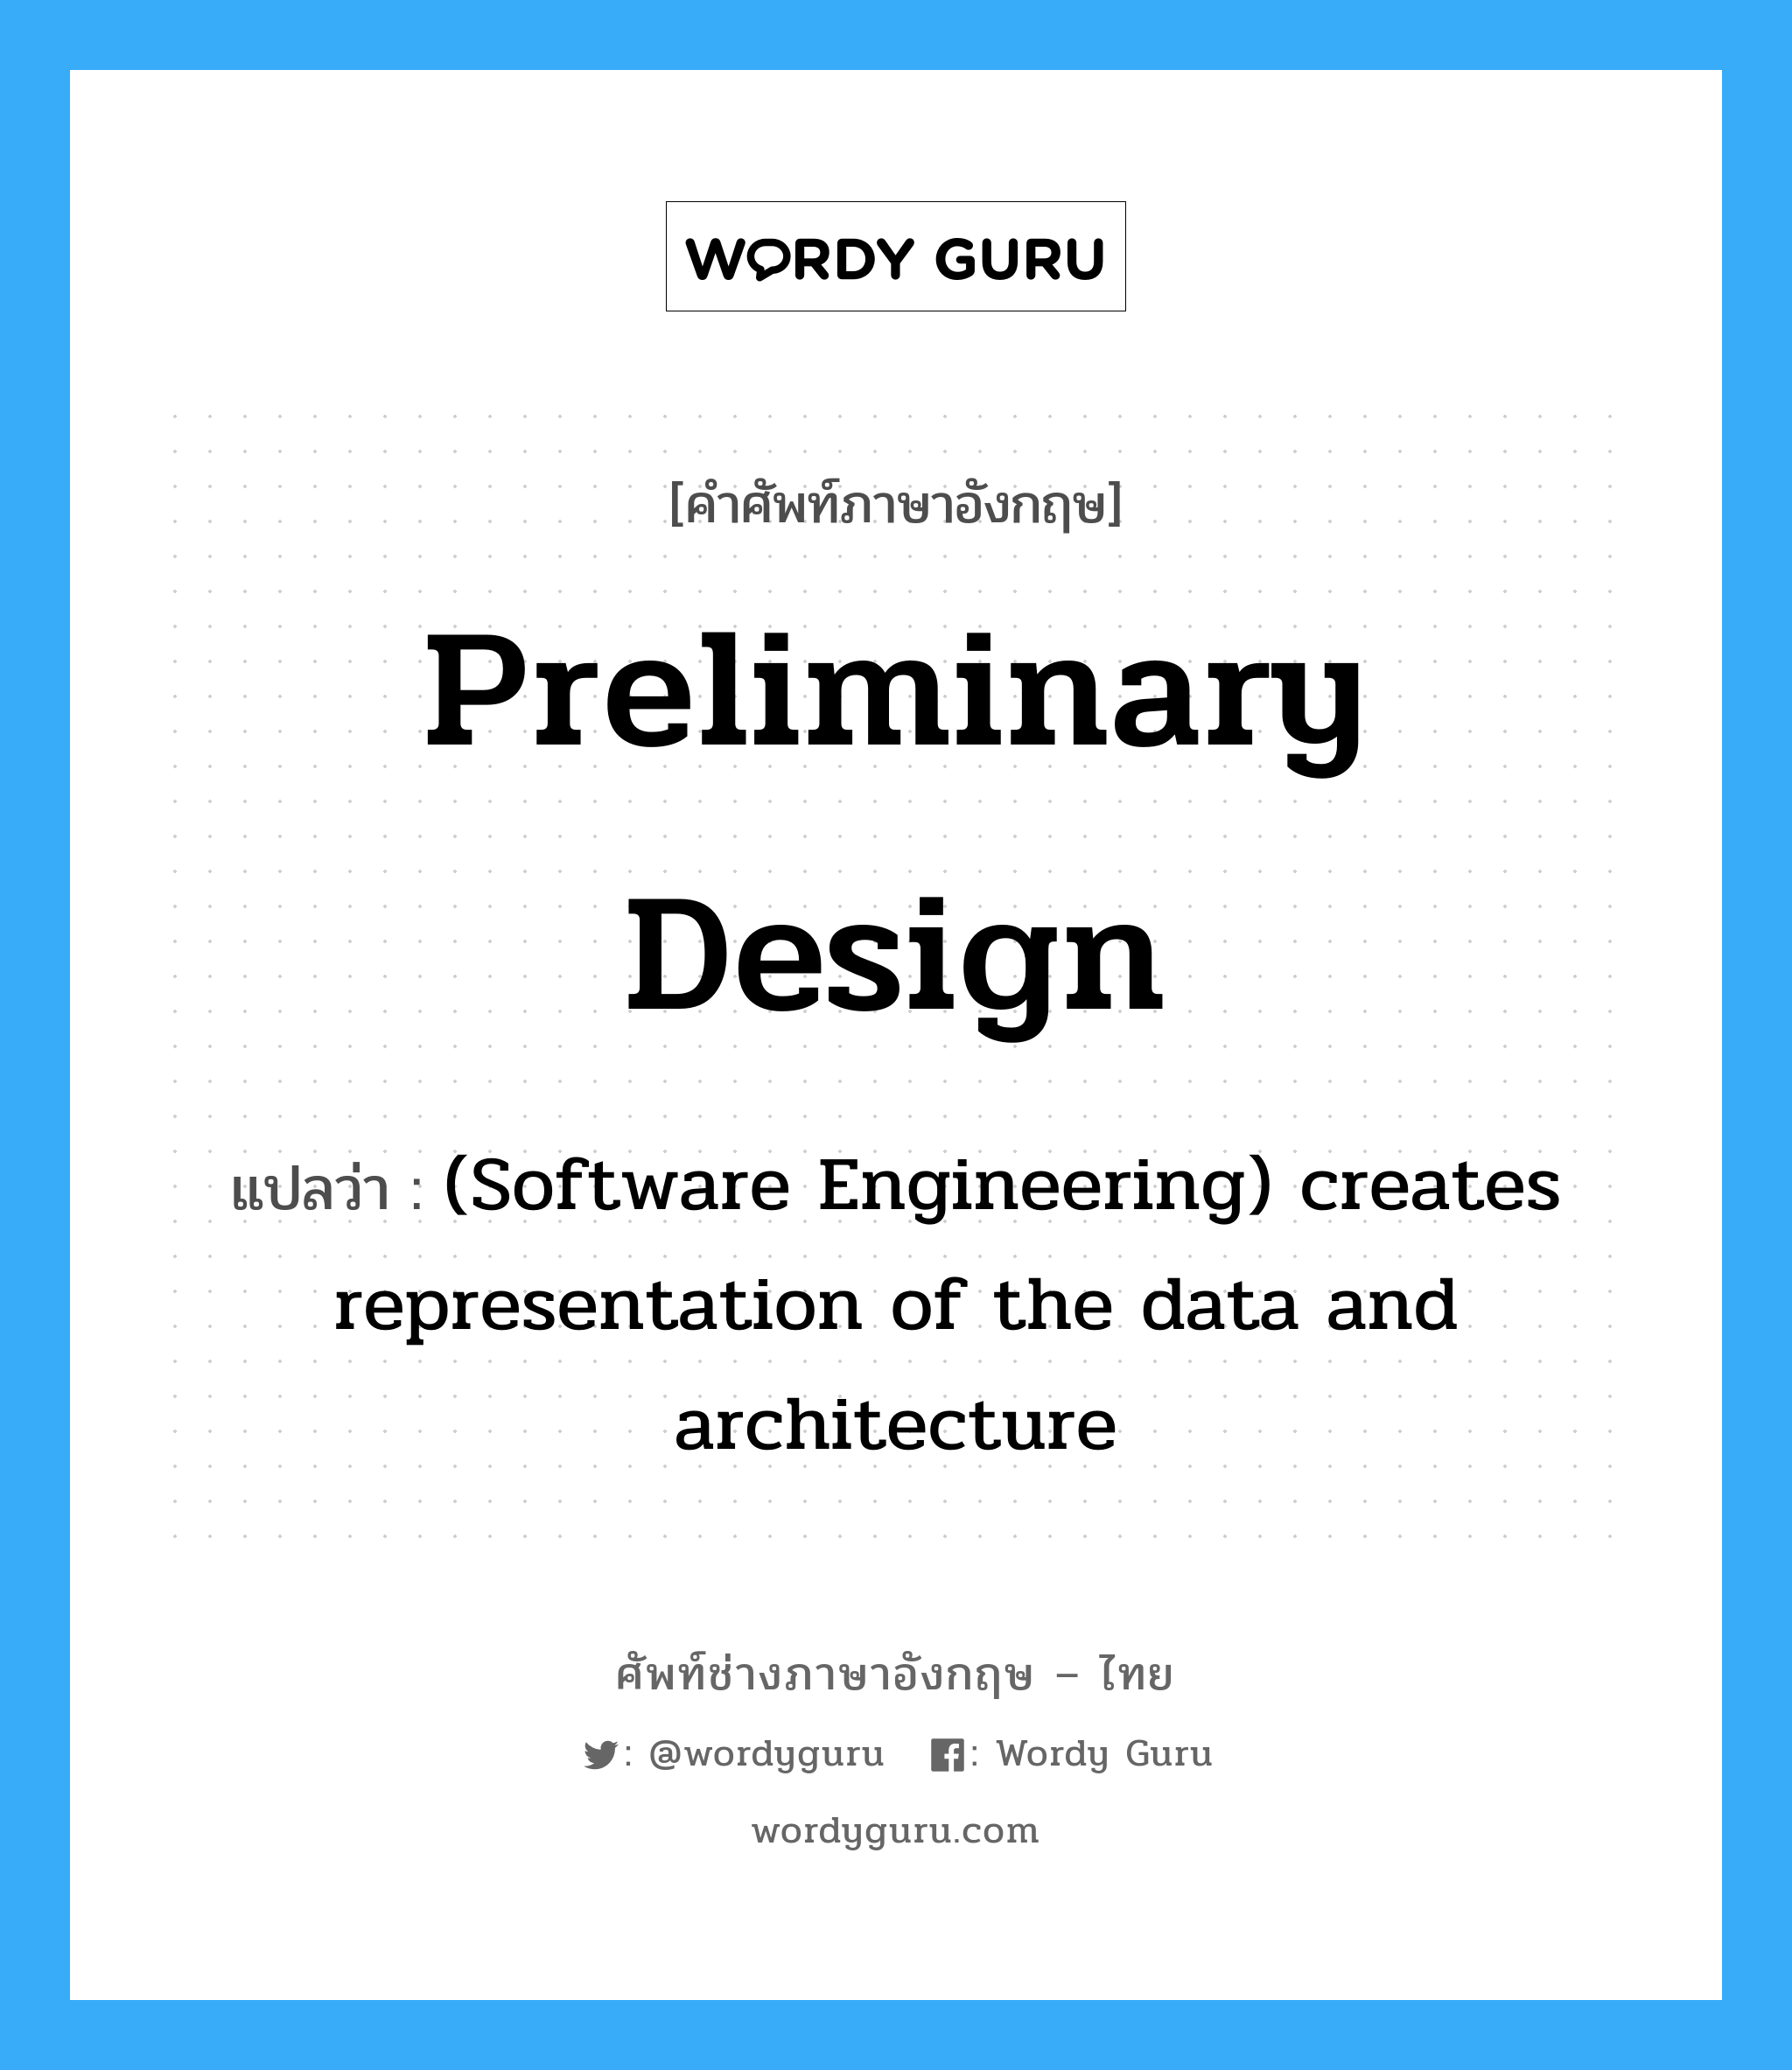 (Software Engineering) creates representation of the data and architecture ภาษาอังกฤษ?, คำศัพท์ช่างภาษาอังกฤษ - ไทย (Software Engineering) creates representation of the data and architecture คำศัพท์ภาษาอังกฤษ (Software Engineering) creates representation of the data and architecture แปลว่า Preliminary design